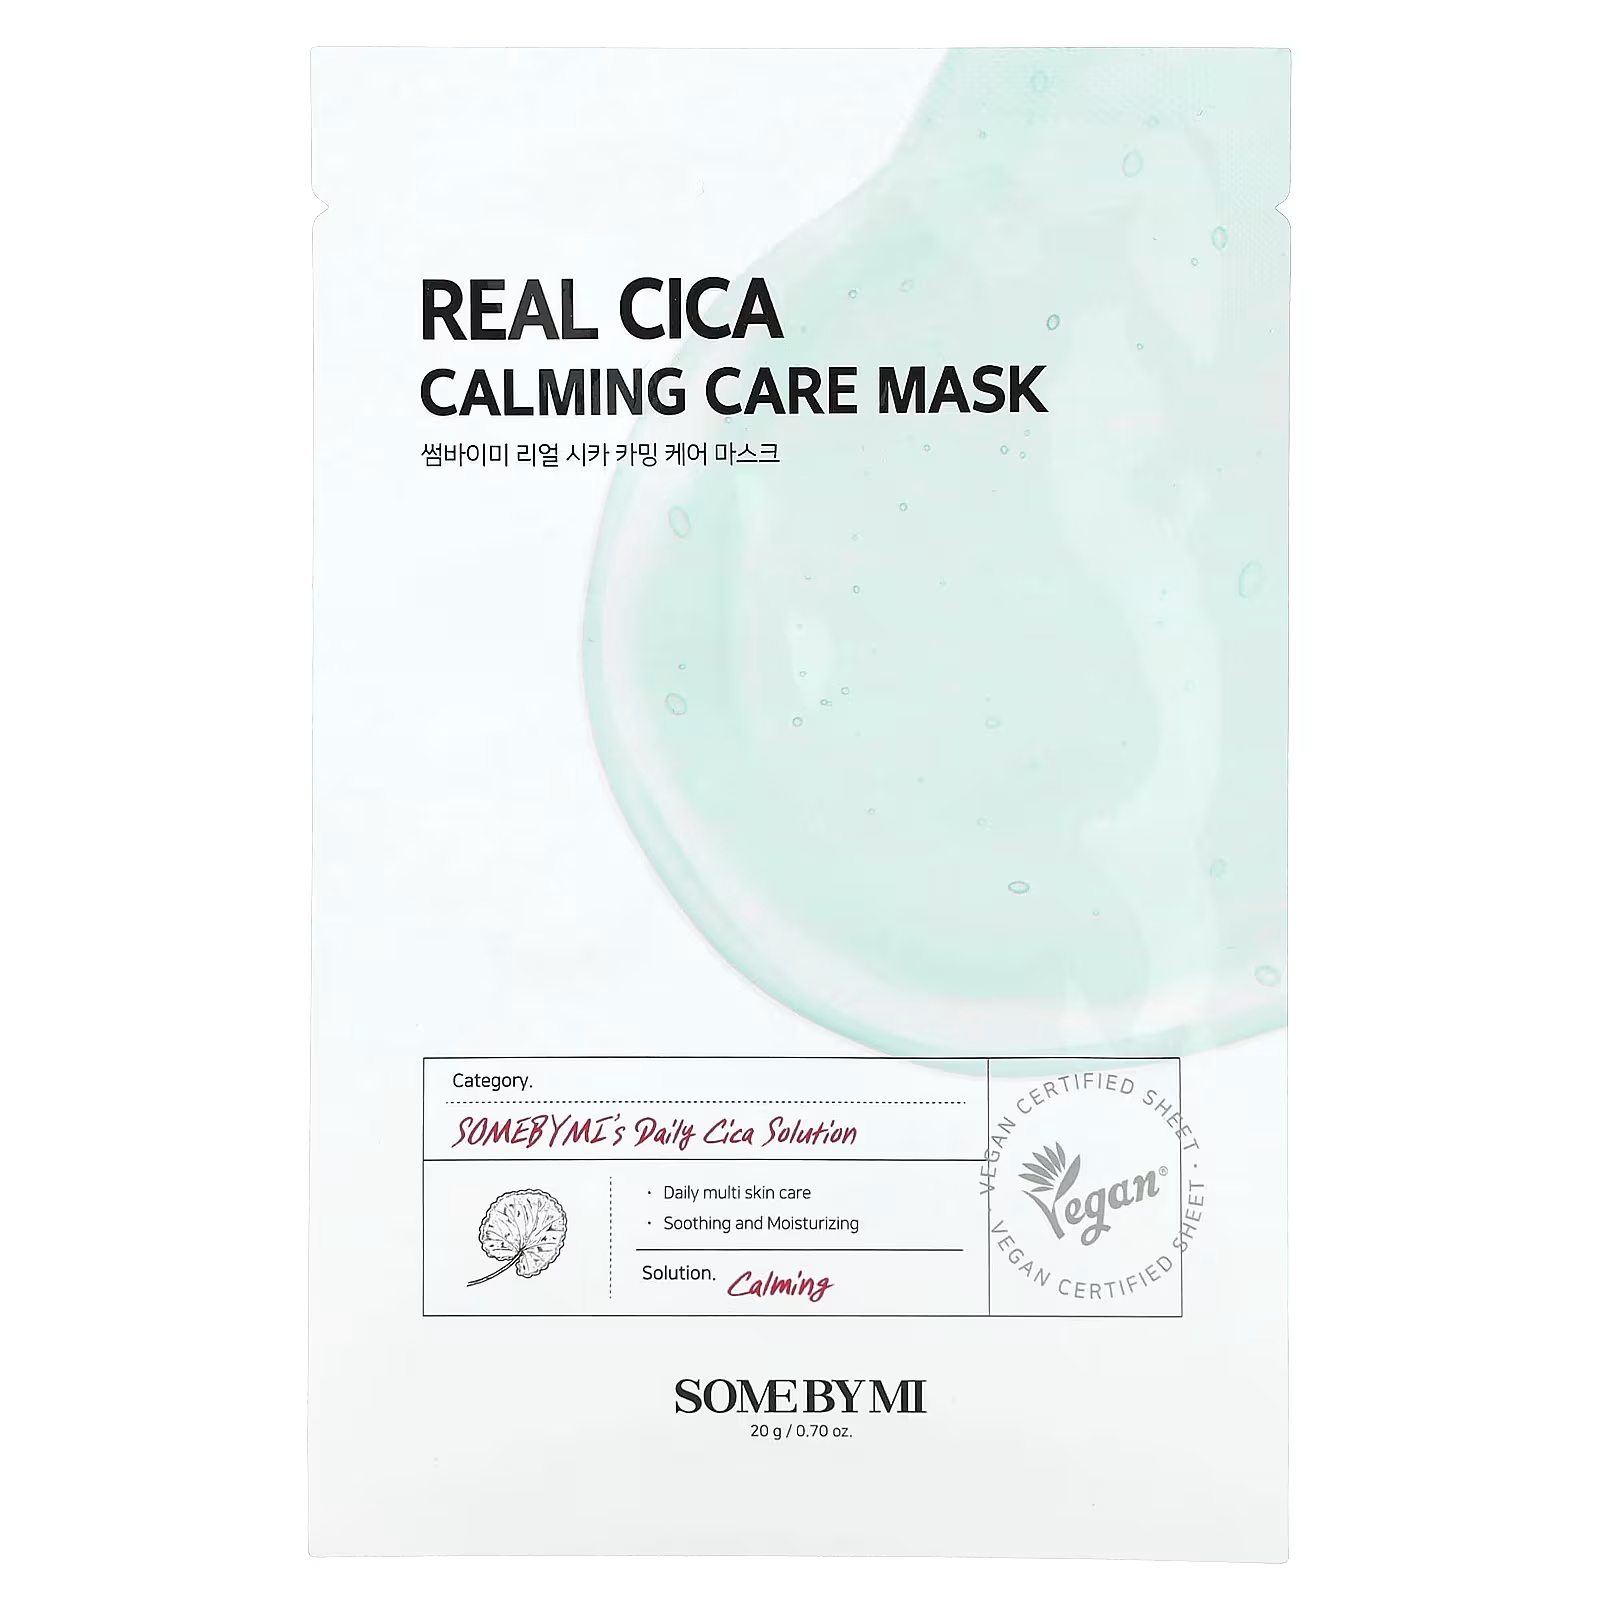 SOME BY MI Real Cica Calming Care Beauty Mask, 1 лист, 0,70 унции (20 г) some by mi real cica calming care beauty mask 1 лист 0 70 унции 20 г